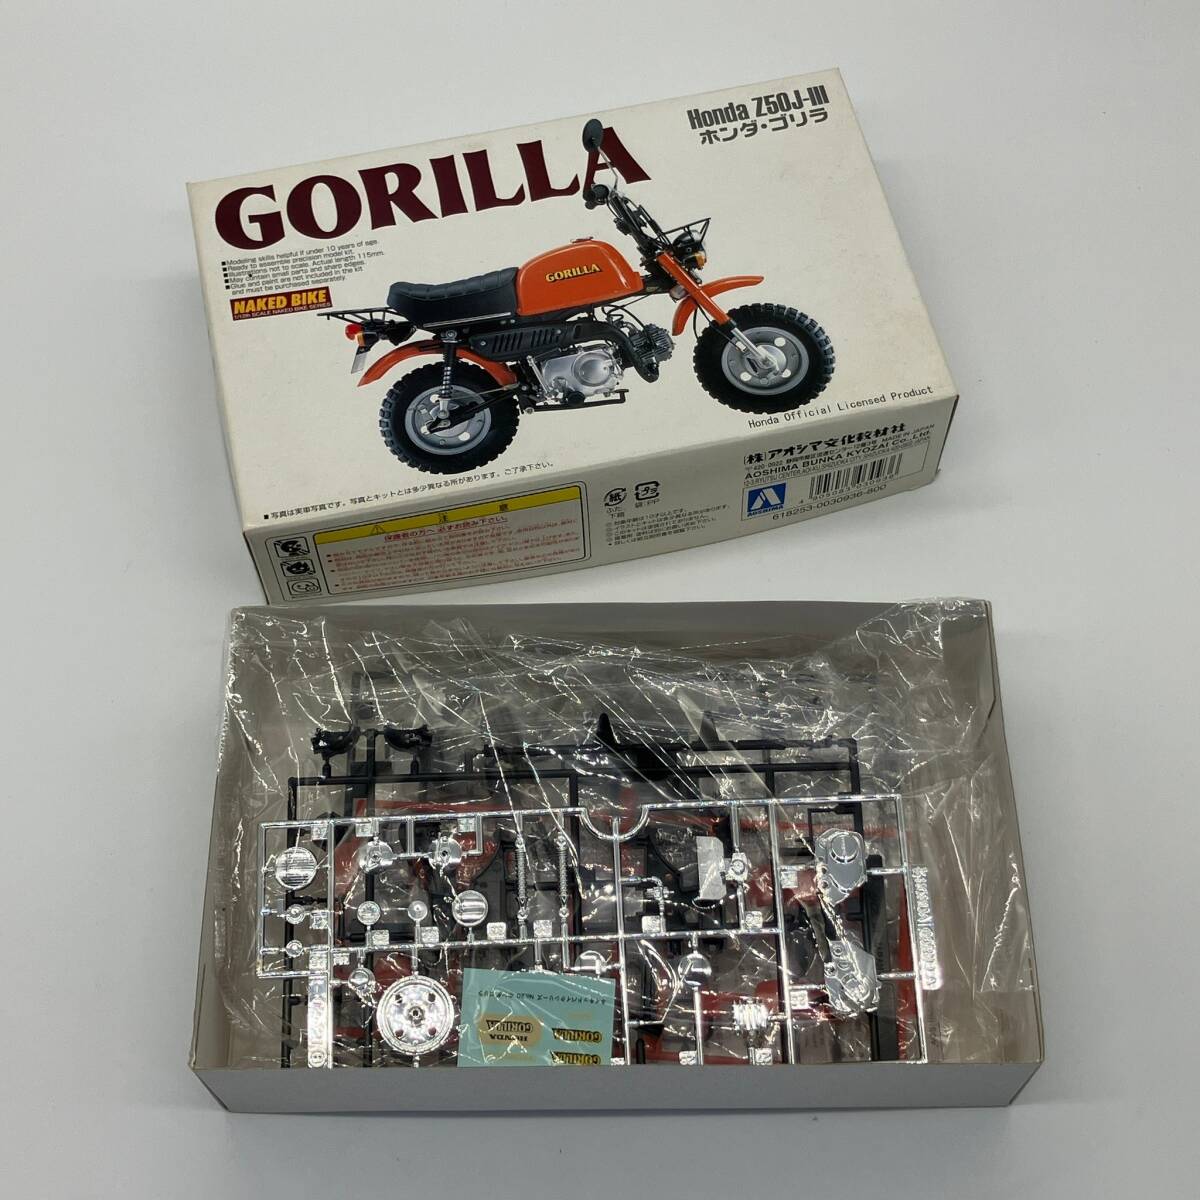 [ outright sales!] not yet assembly plastic model AOSHIMA Aoshima HONDA GORILLA Honda Gorilla Z50J-Ⅲ No,20 1/12